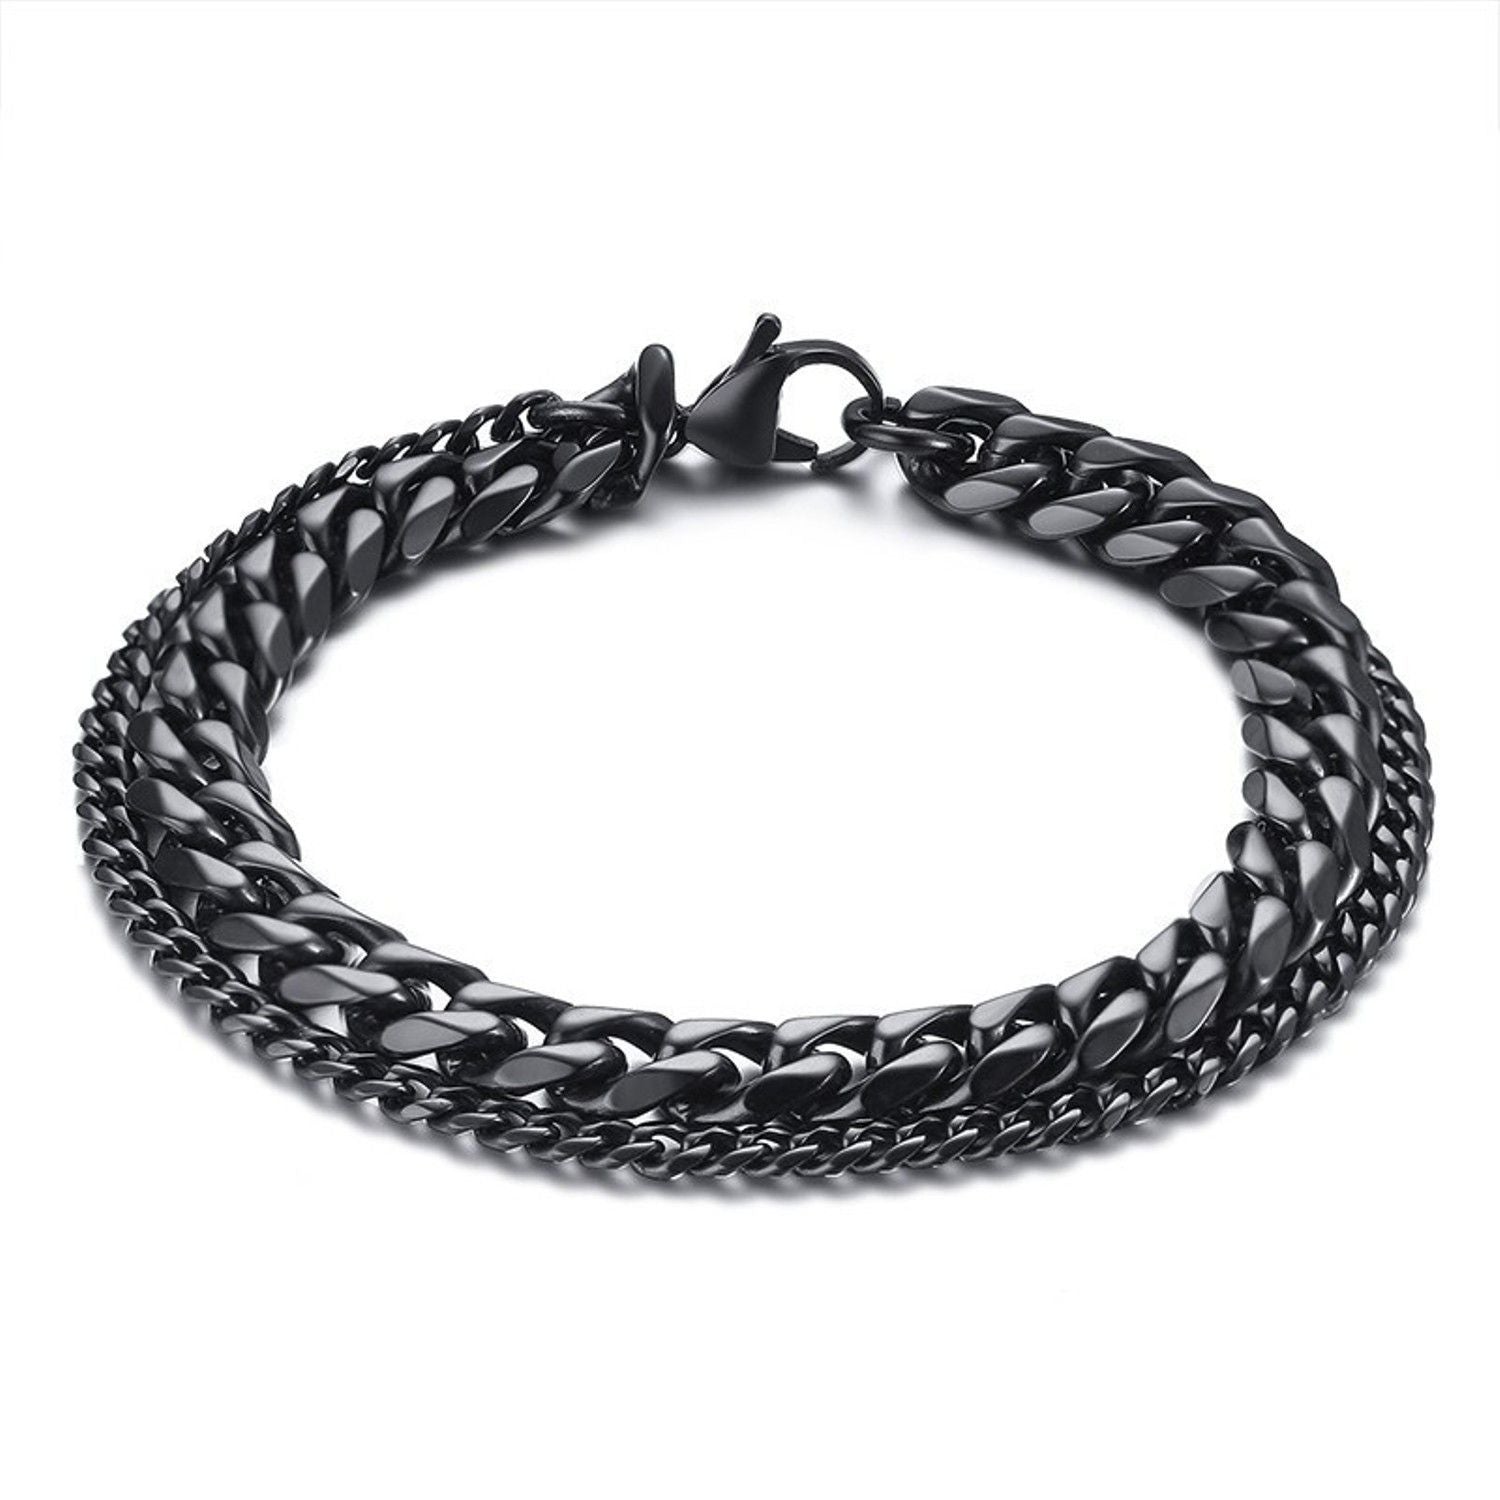 Layered Wrist Wrap Black Stainless Steel Curb Chain Bracelet